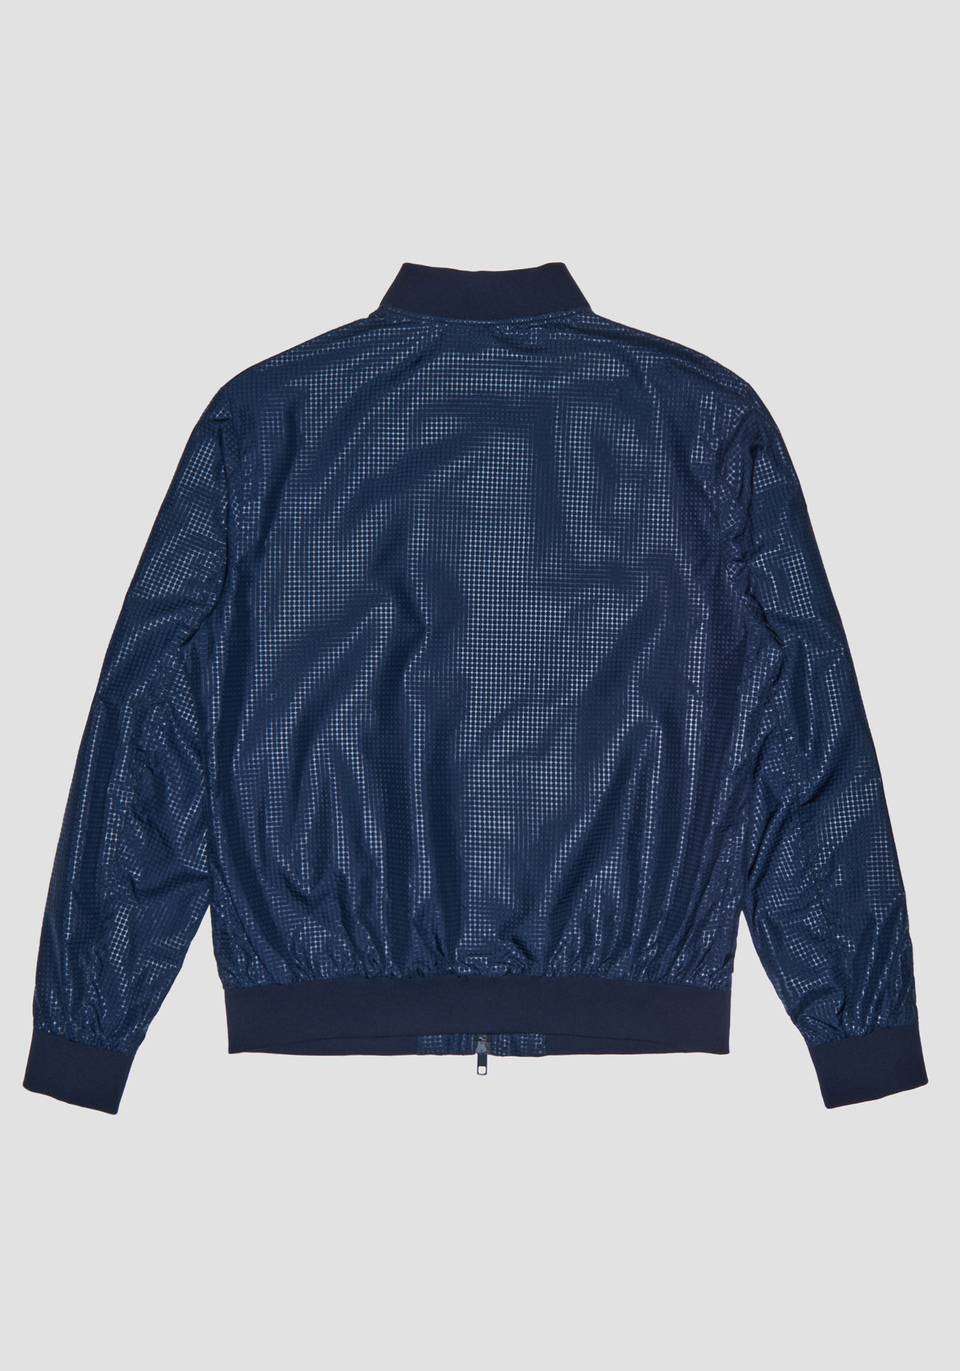 BOMBER JACKET IN A HI-TECH FABRIC WITH A RAISED MICRO-SPHERE PATTERN - Antony Morato Online Shop